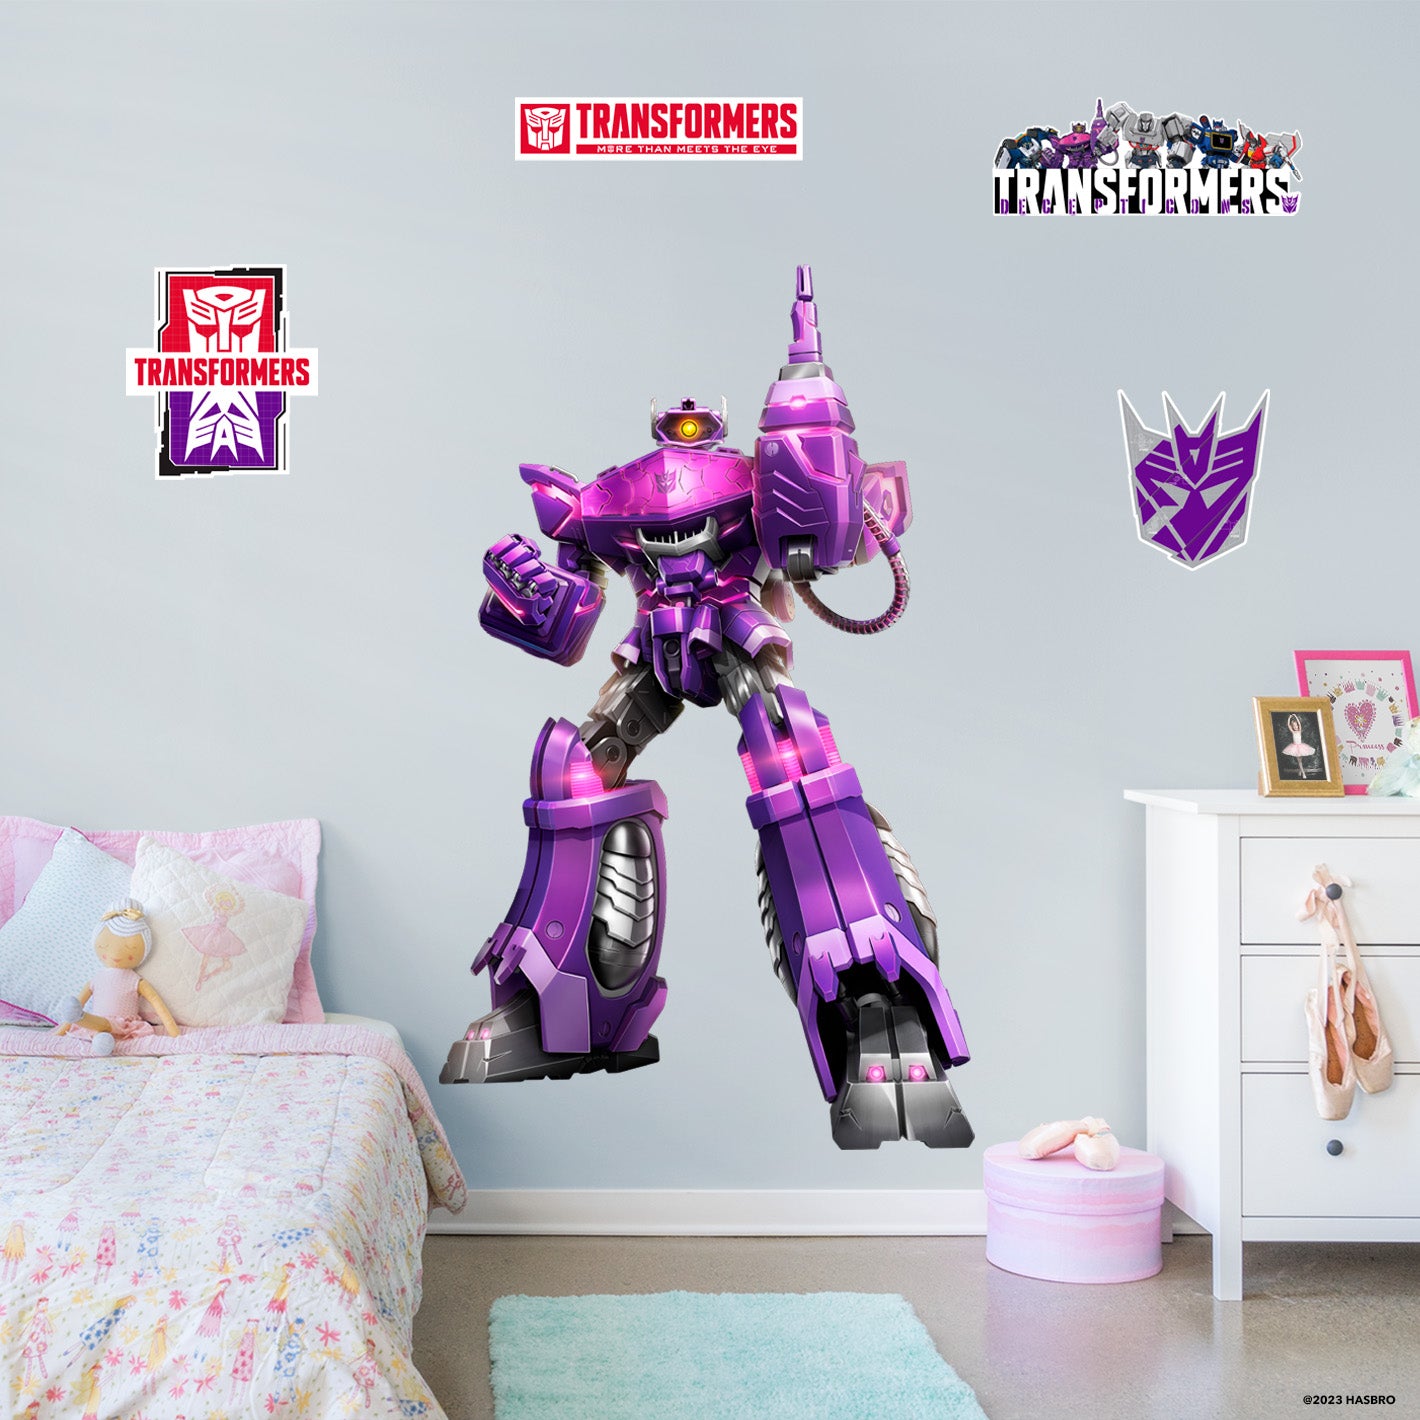 Transformers: Shockwave RealBig        - Officially Licensed Hasbro Removable     Adhesive Decal